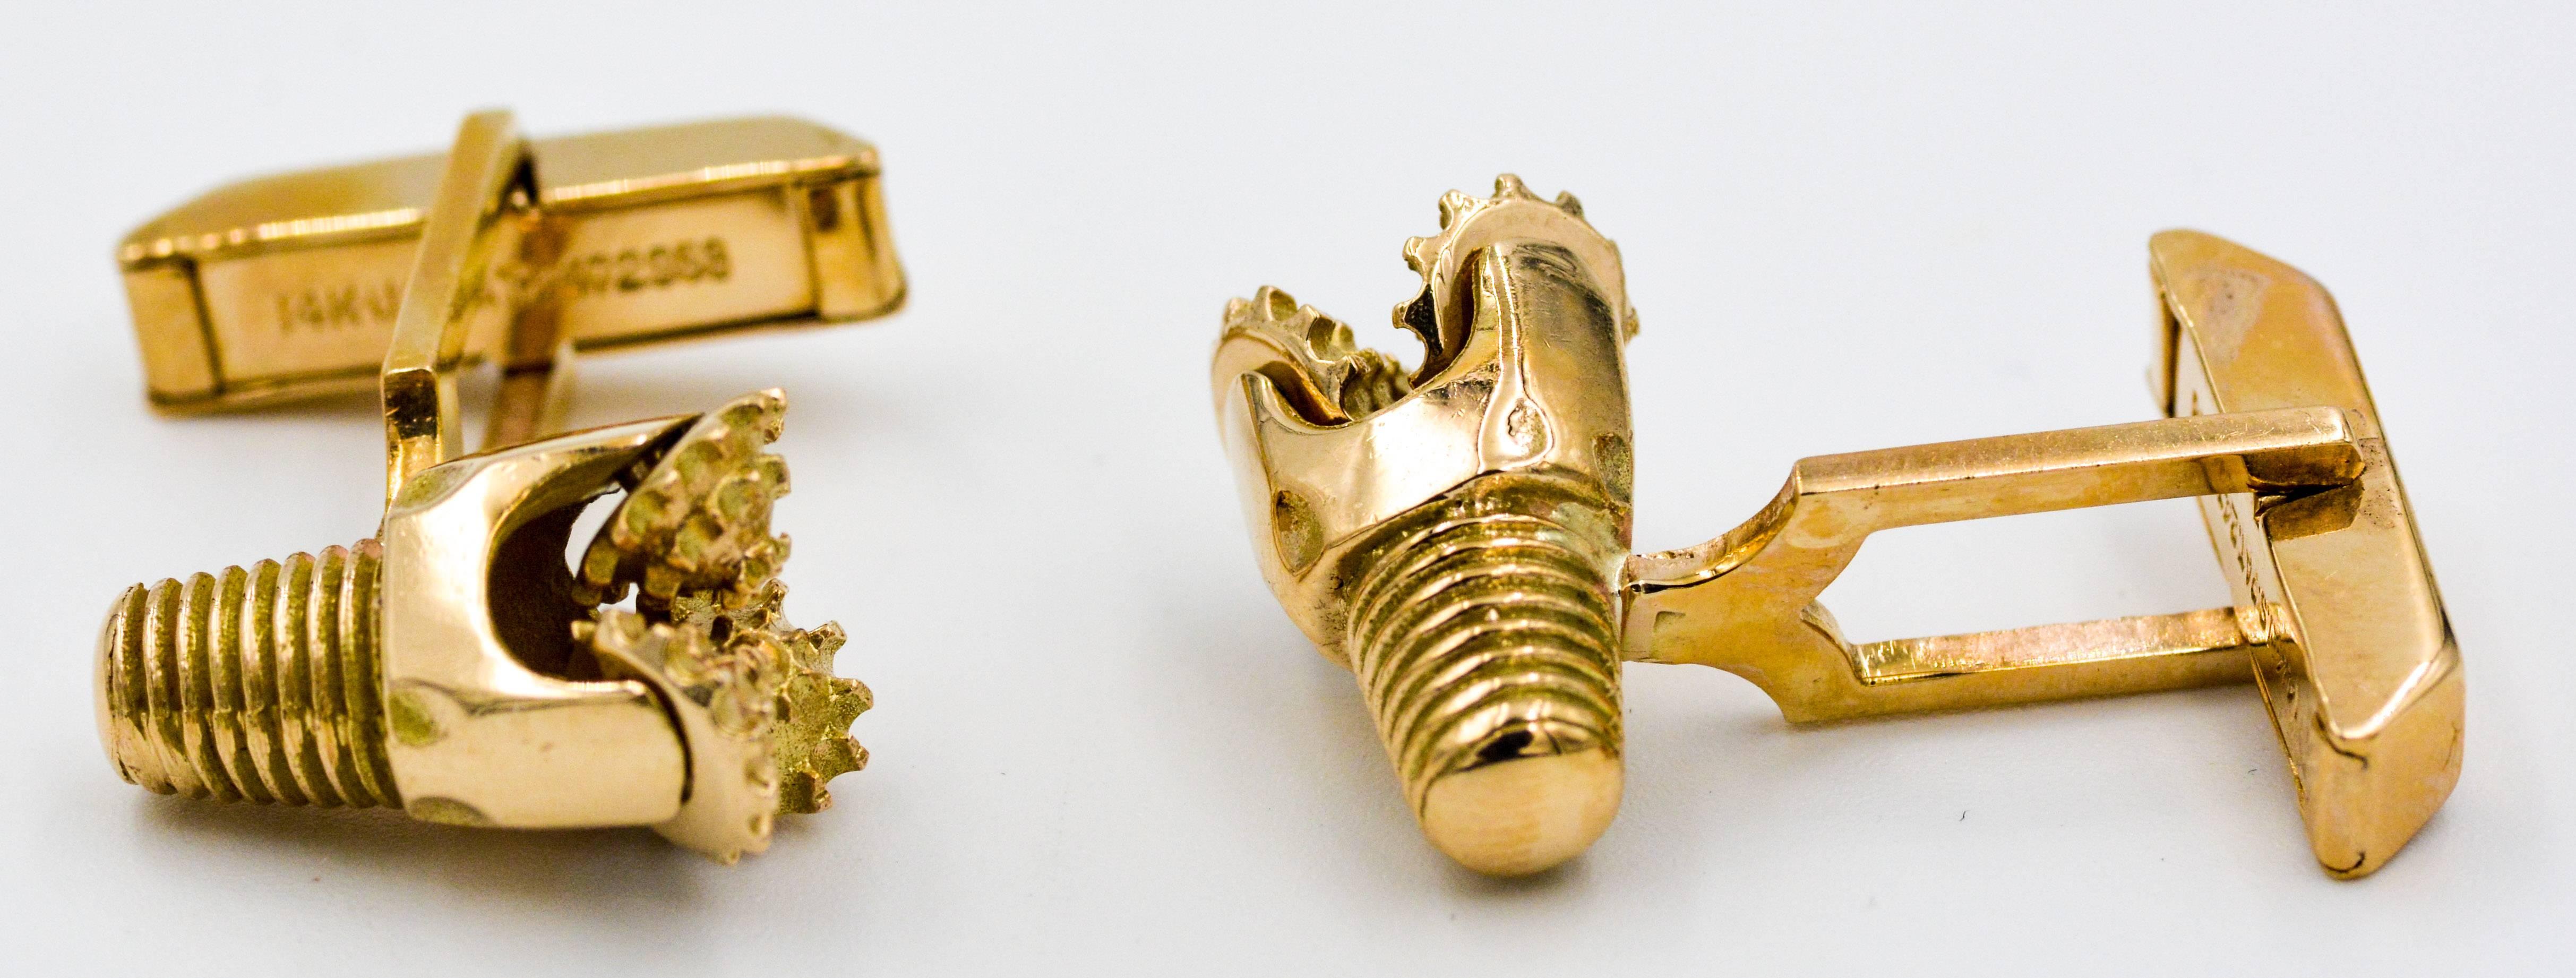 These interesting and masculine Oil Rig Drill Bit cuff links are made of 14kt yellow gold and have a three rotating bit base.  The cuff-links also have the screw attachment at the back of the drill design.  These Oil Rig Drill Bits are mounted on a